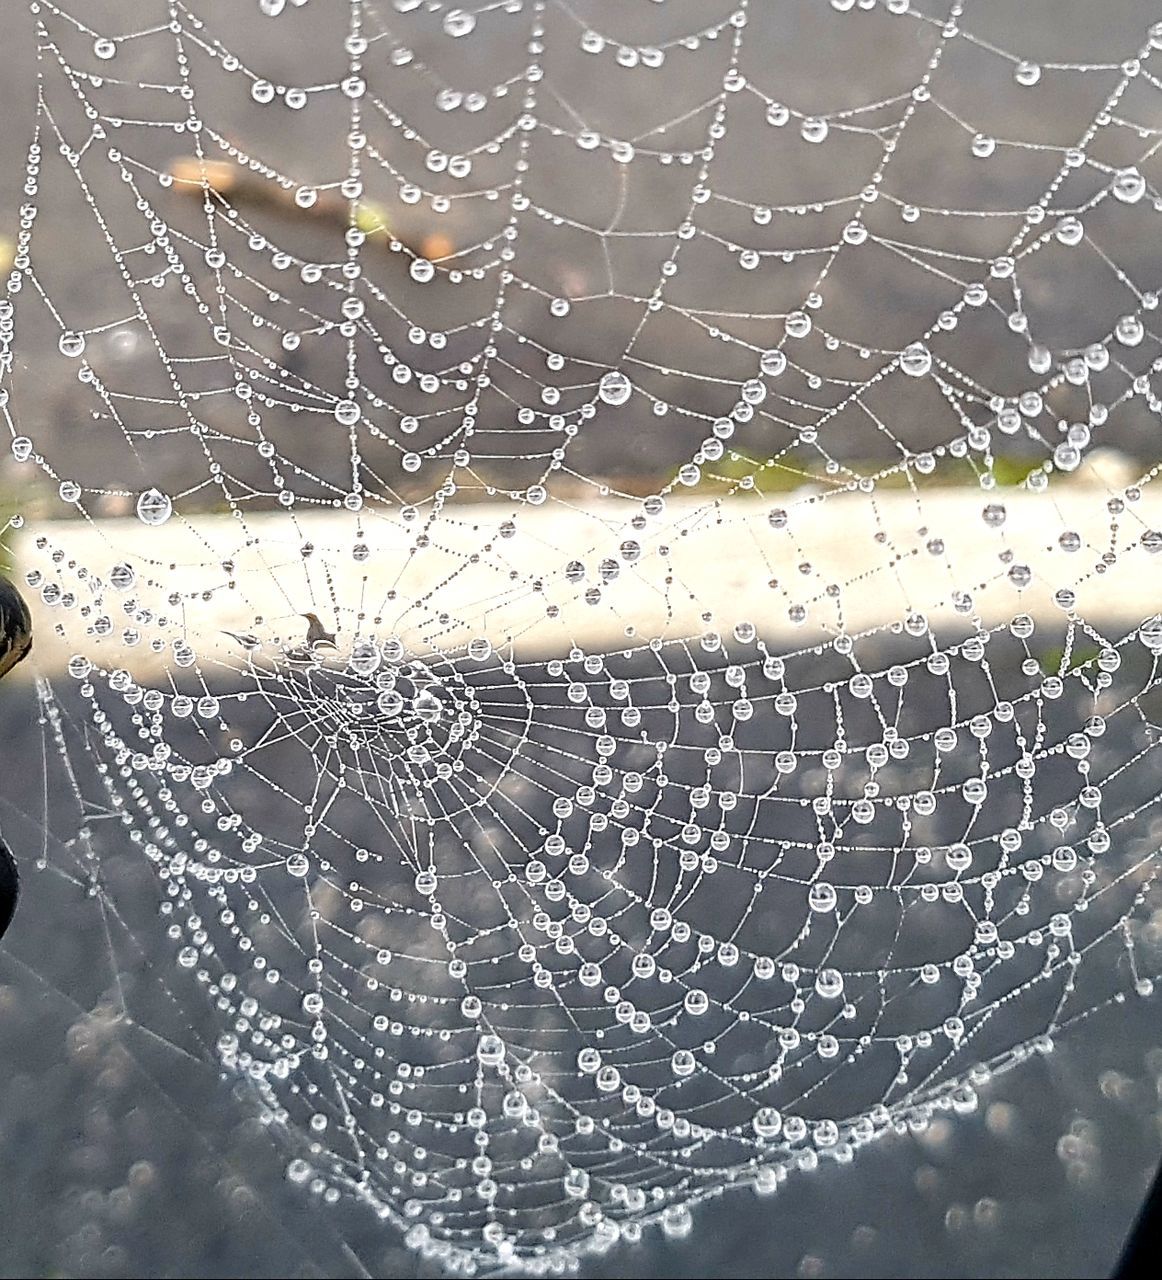 spider web, fragility, close-up, vulnerability, spider, drop, no people, natural pattern, water, focus on foreground, pattern, arthropod, arachnid, nature, beauty in nature, complexity, day, wet, web, outdoors, dew, raindrop, concentric